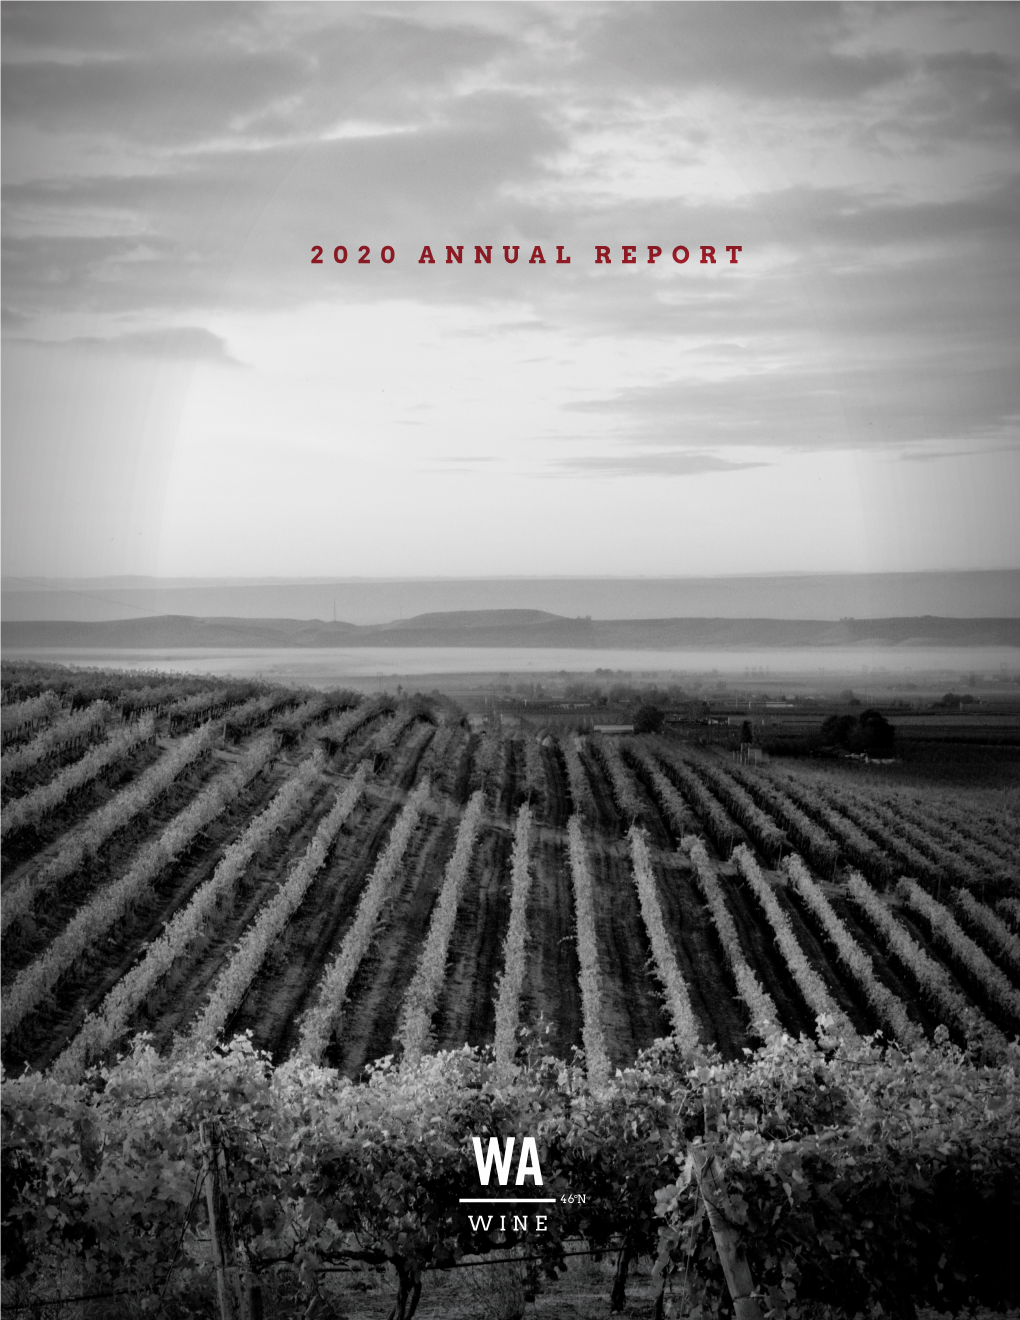 2020 ANNUAL REPORT Dear Washington State Wine Industry Colleagues and Friends